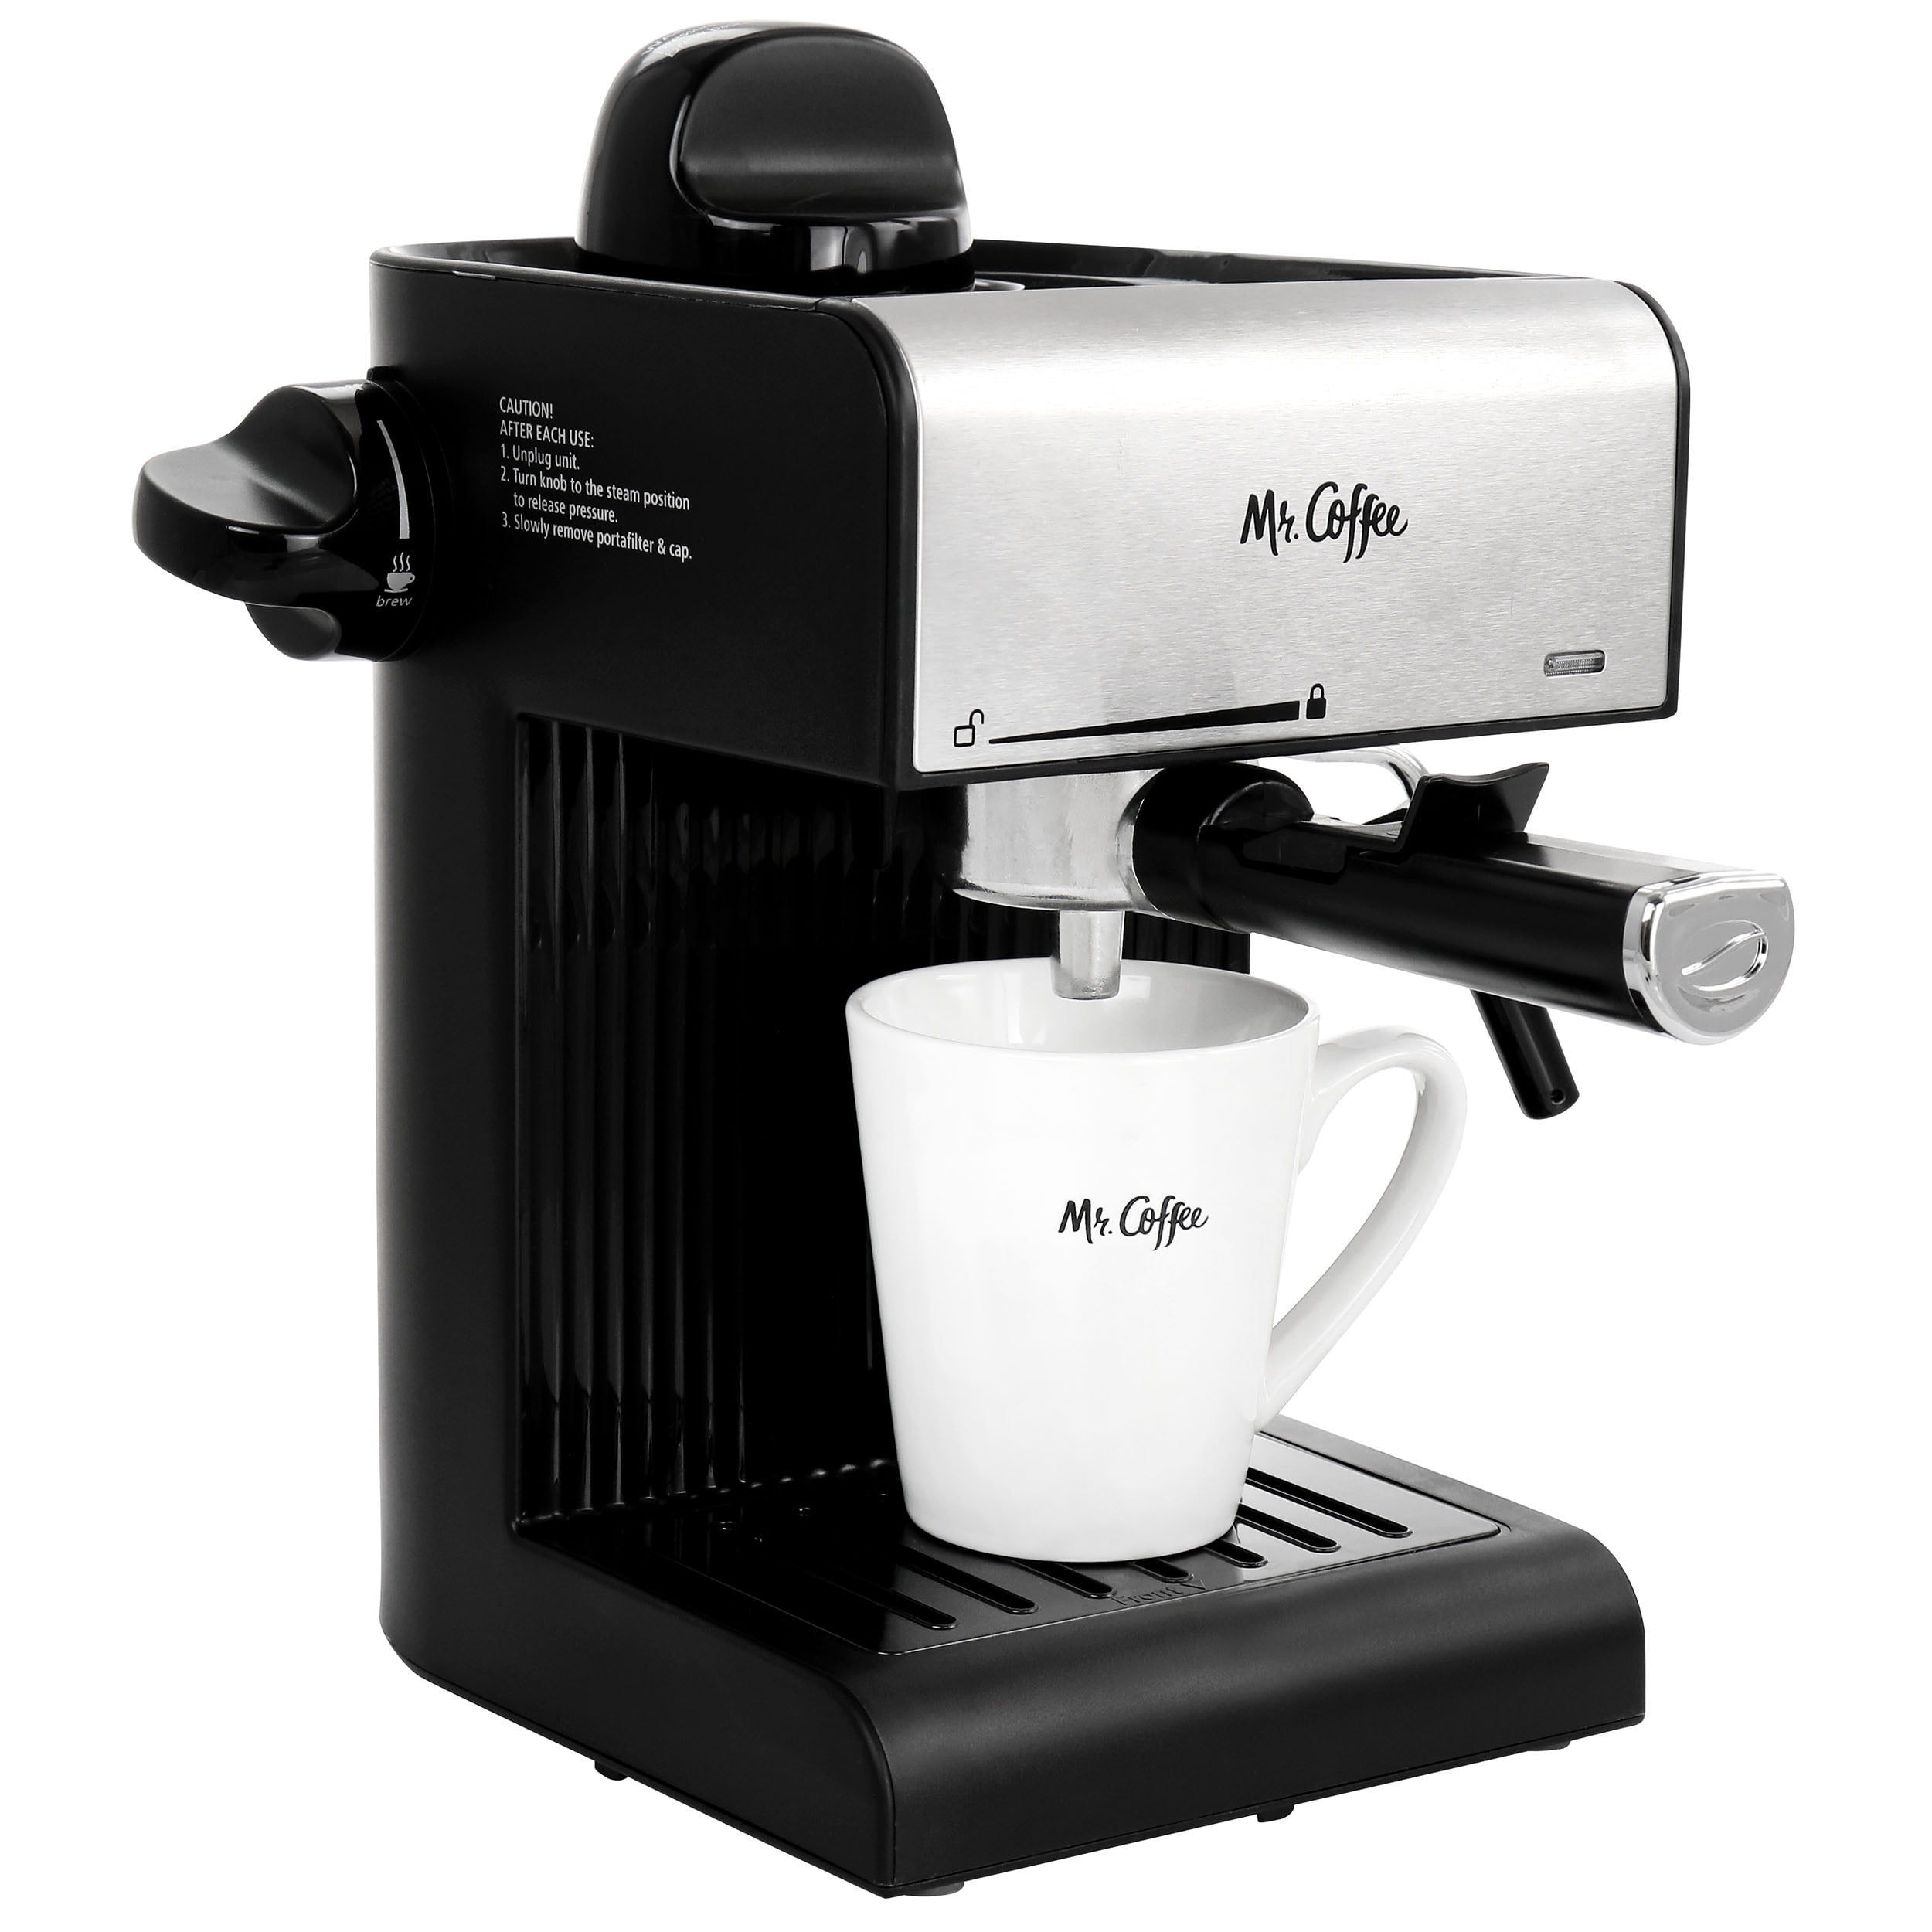 Mr Coffee ECM160 Steam Espresso Machine 4 Cup Frother for sale online 